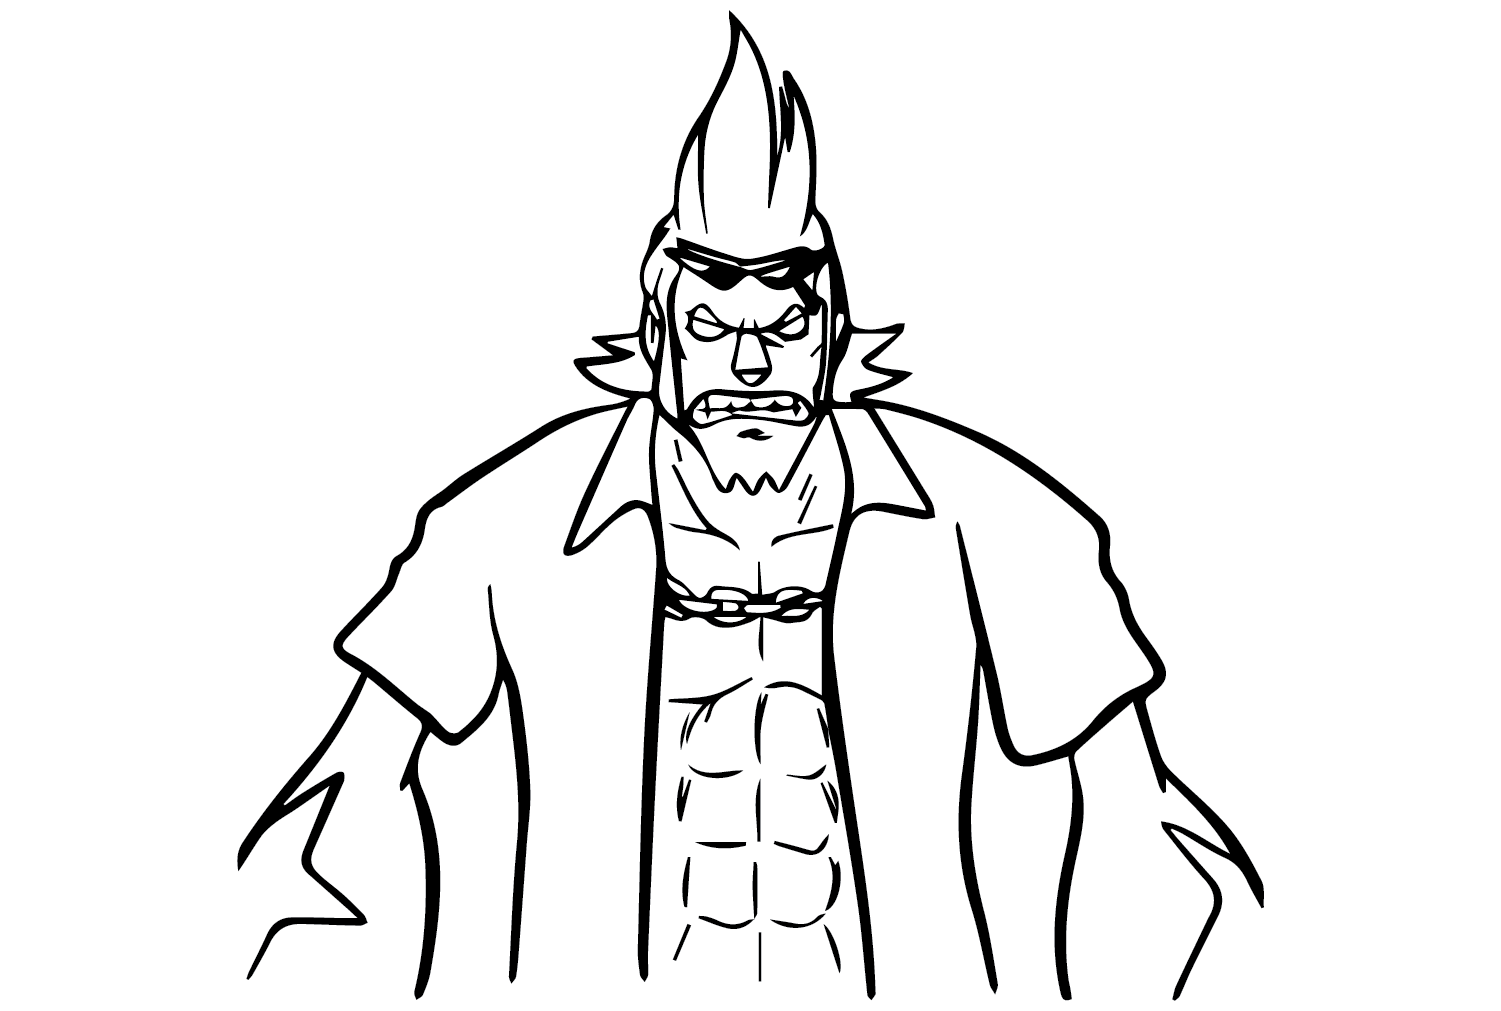 Franky Coloring Page from Franky